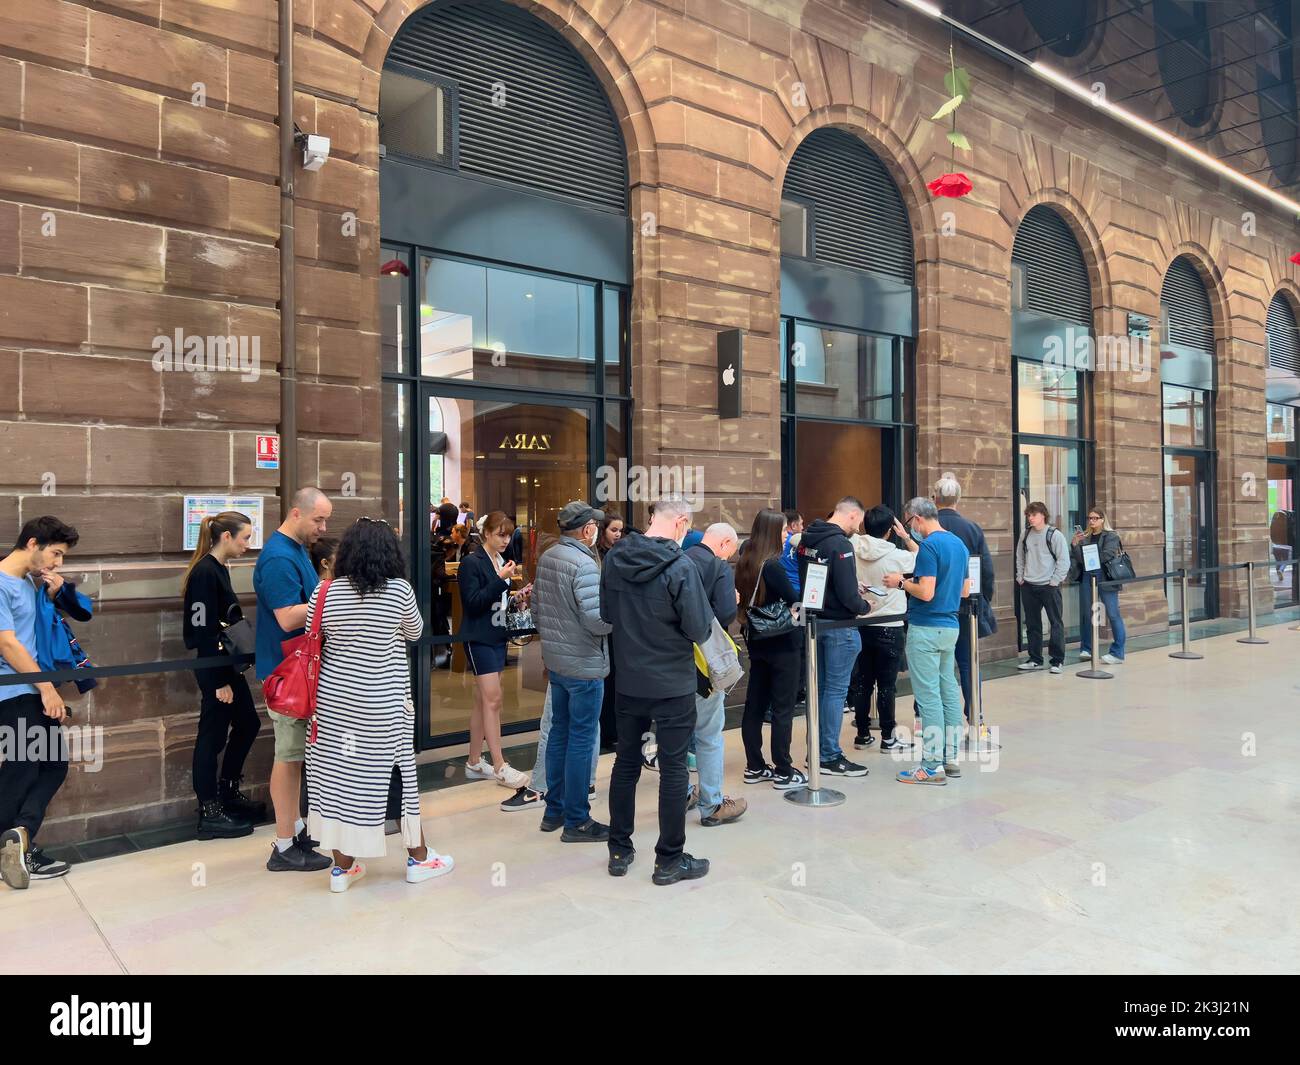 Paris, France - Sep 16, 2022: Group of adult and young people in line queue in front of Apple Store with customers waiting in line to buy the latest iPhone 14 Pro Max Plus smartphone, Apple Watch series 8 and Ultra Stock Photo